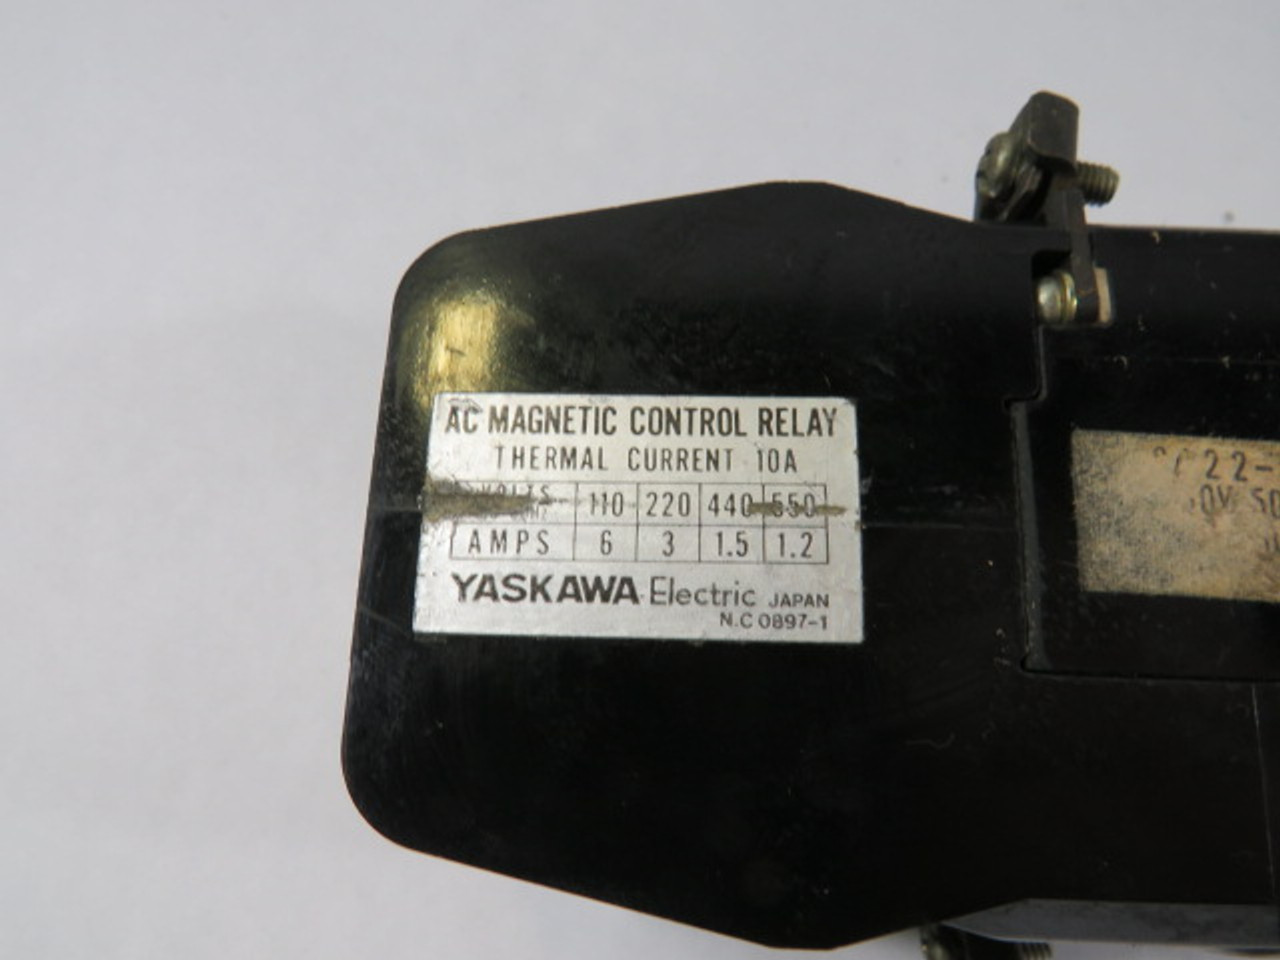 Yaskawa RL-33E Magnetic Control Relay 1.2-6A  200-220V@60Hz 4A 2B Contacts USED